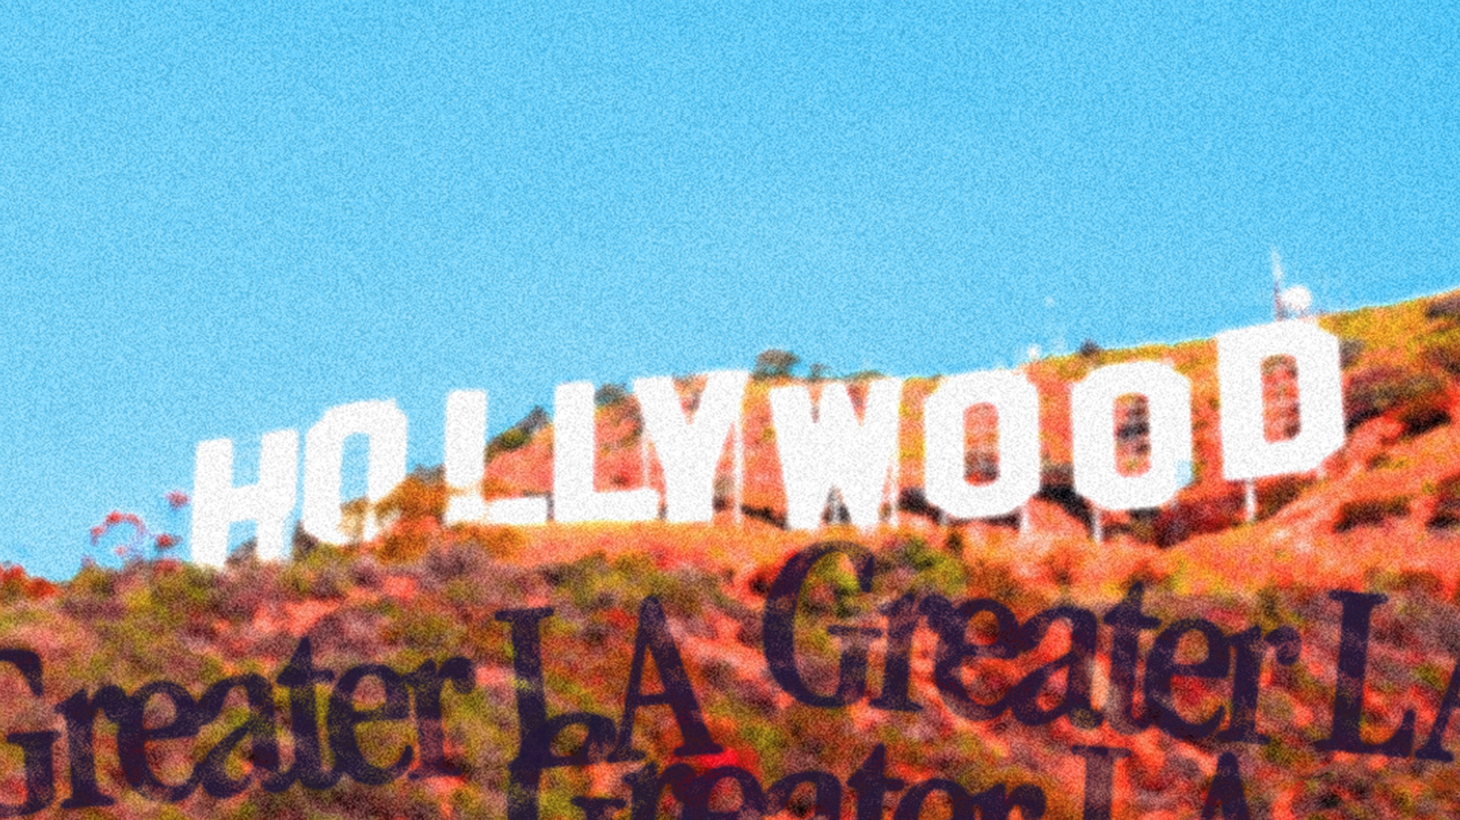 Greater LA looks at 100 years of the Hollywood Sign and its lore.